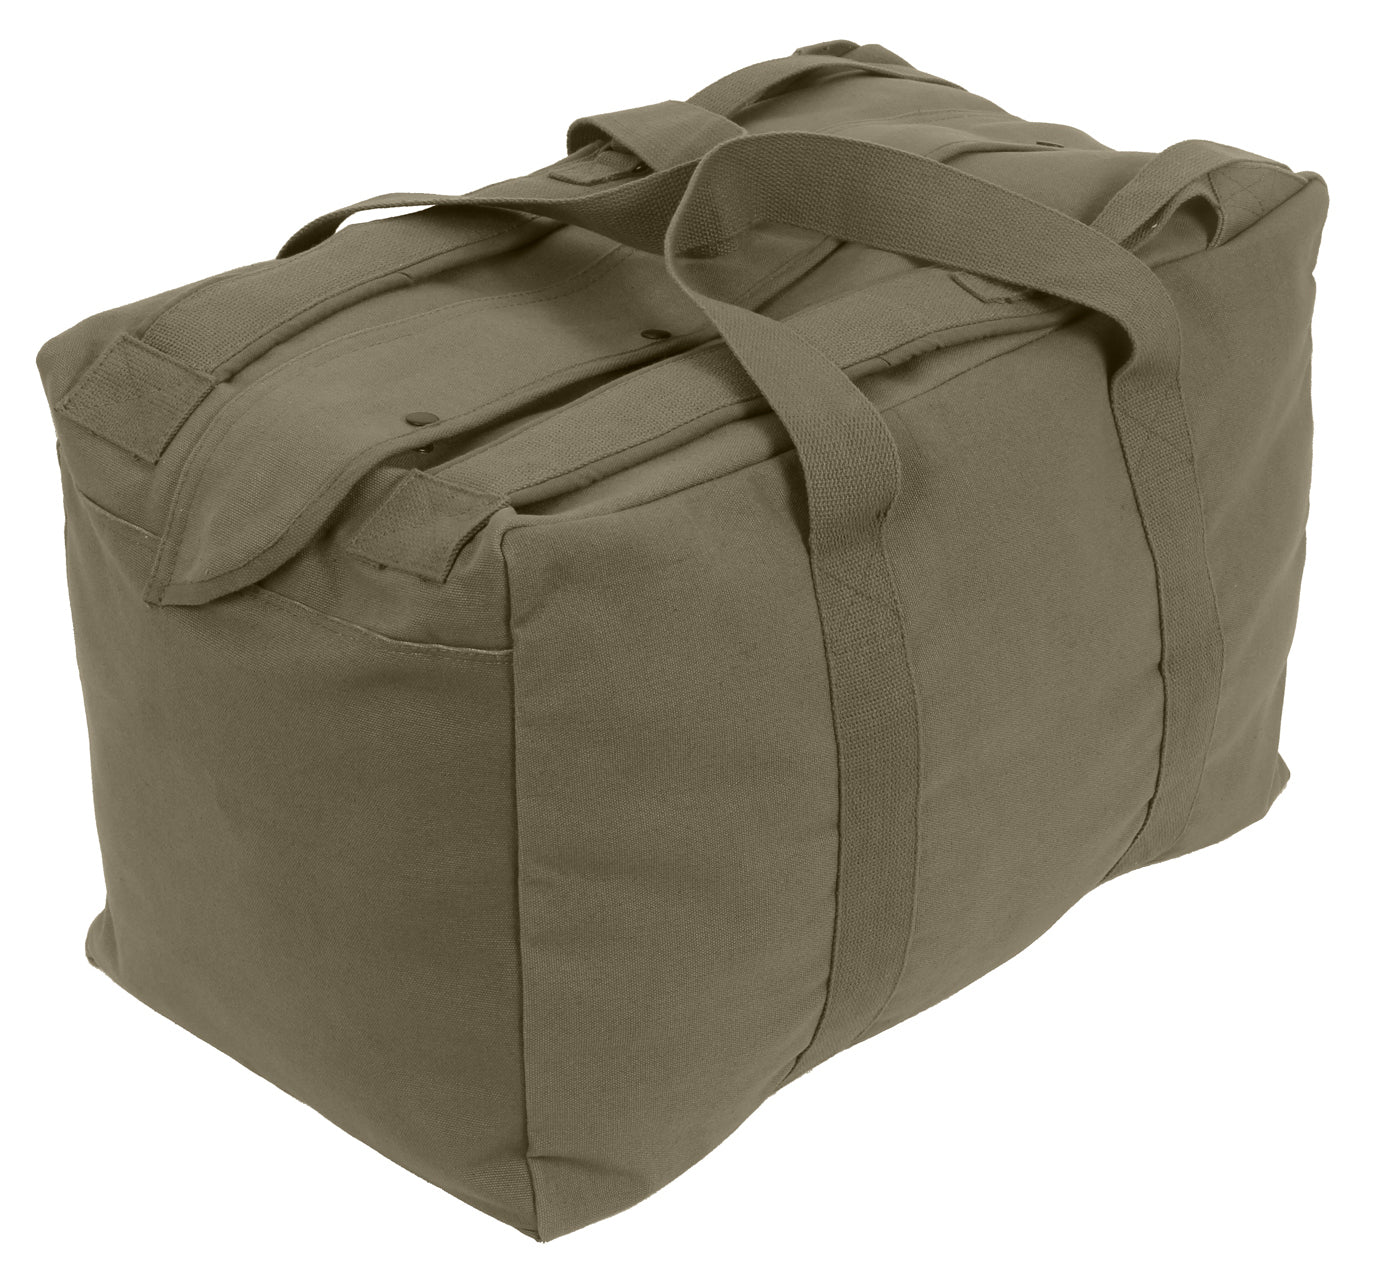 Tactical Canvas Cargo Bag / Backpack - Tactical Choice Plus